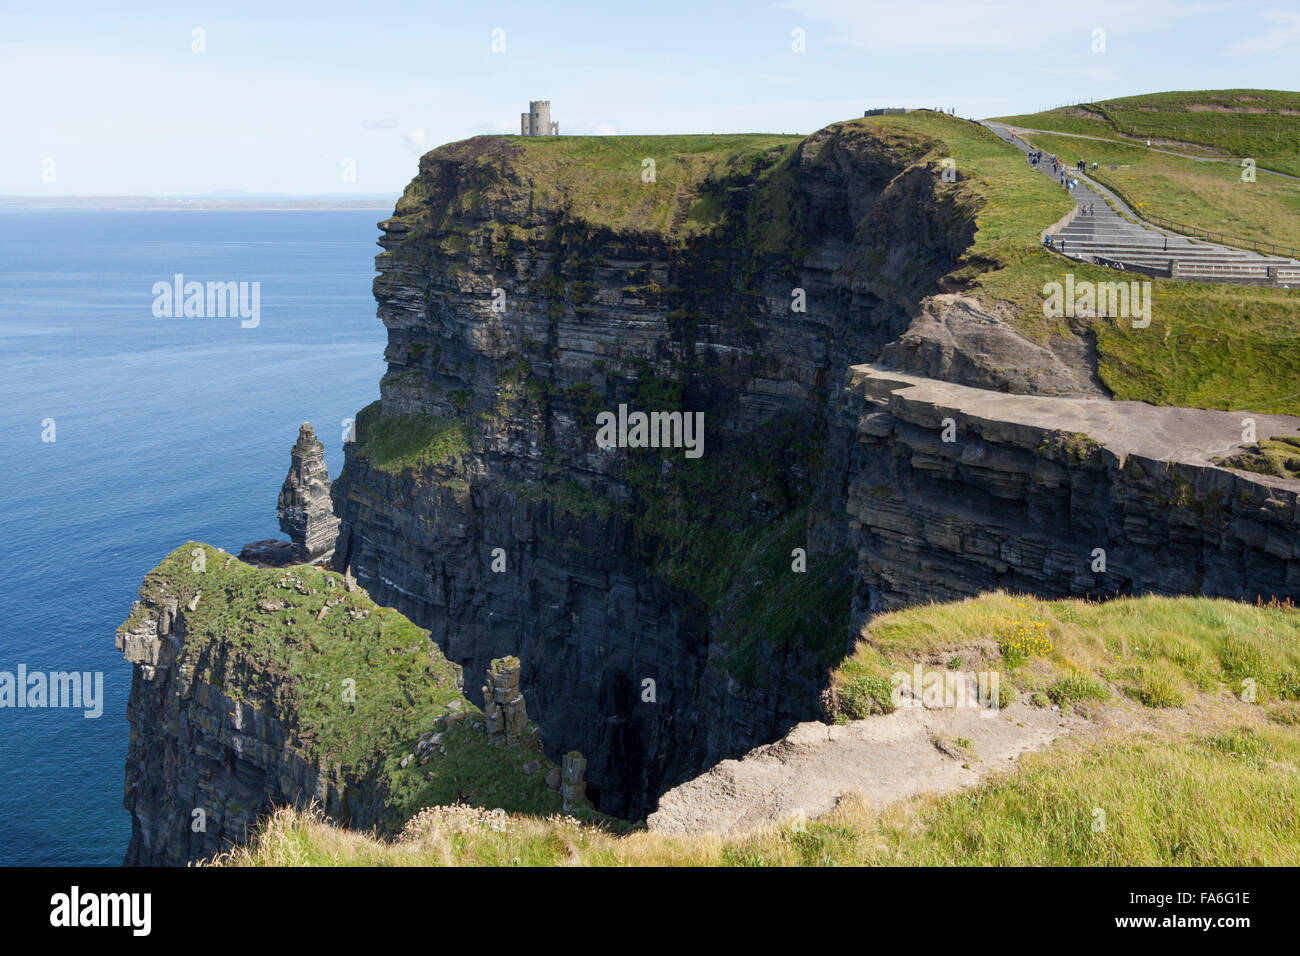 The dramatic Atlantic views at the Cliffs of Moher on Ireland's west coast, a popular tourist destination Stock Photo